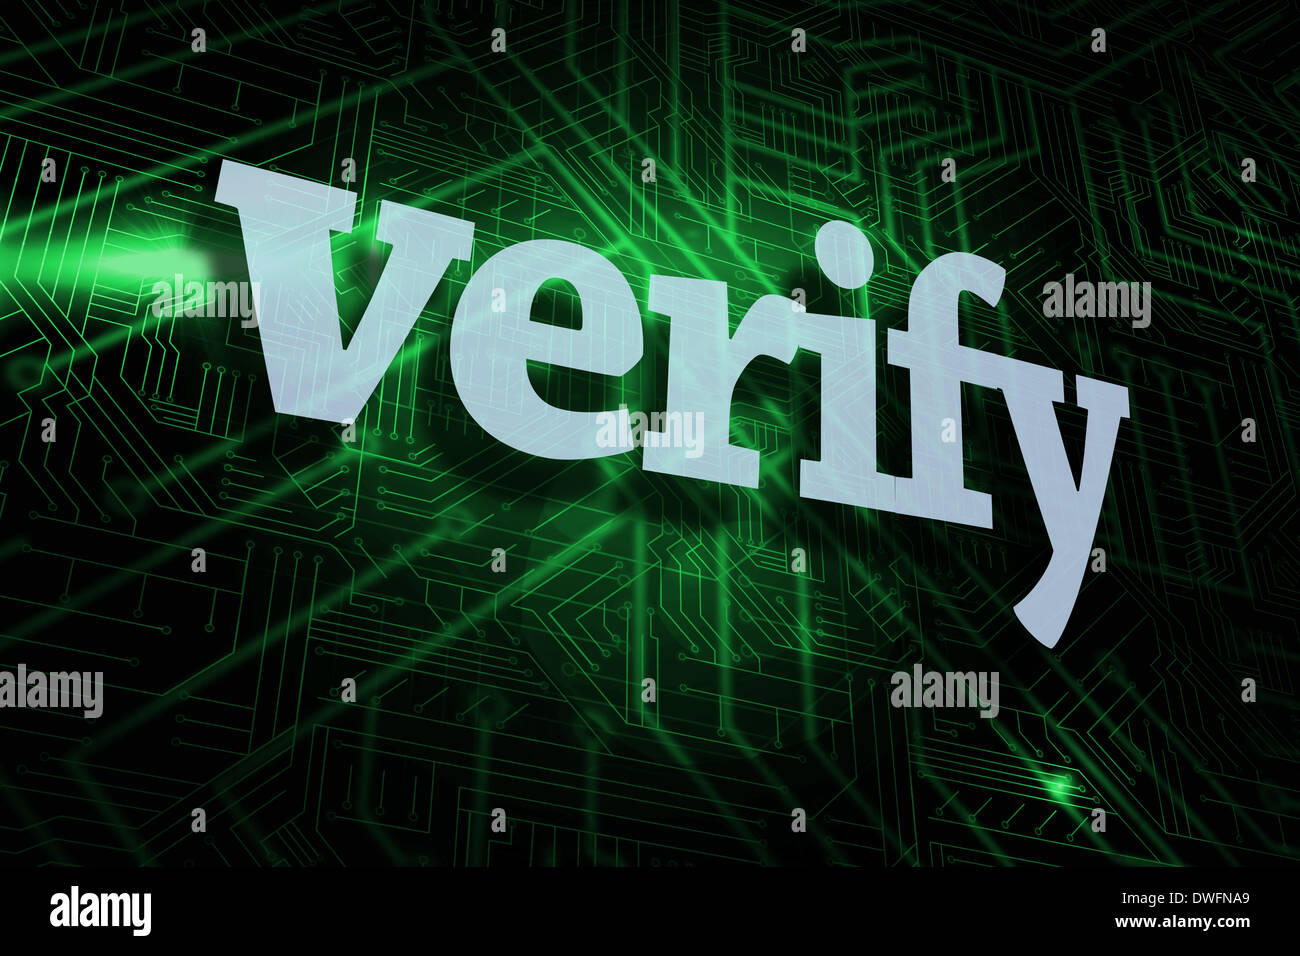 Verify against green and black circuit board Stock Photo